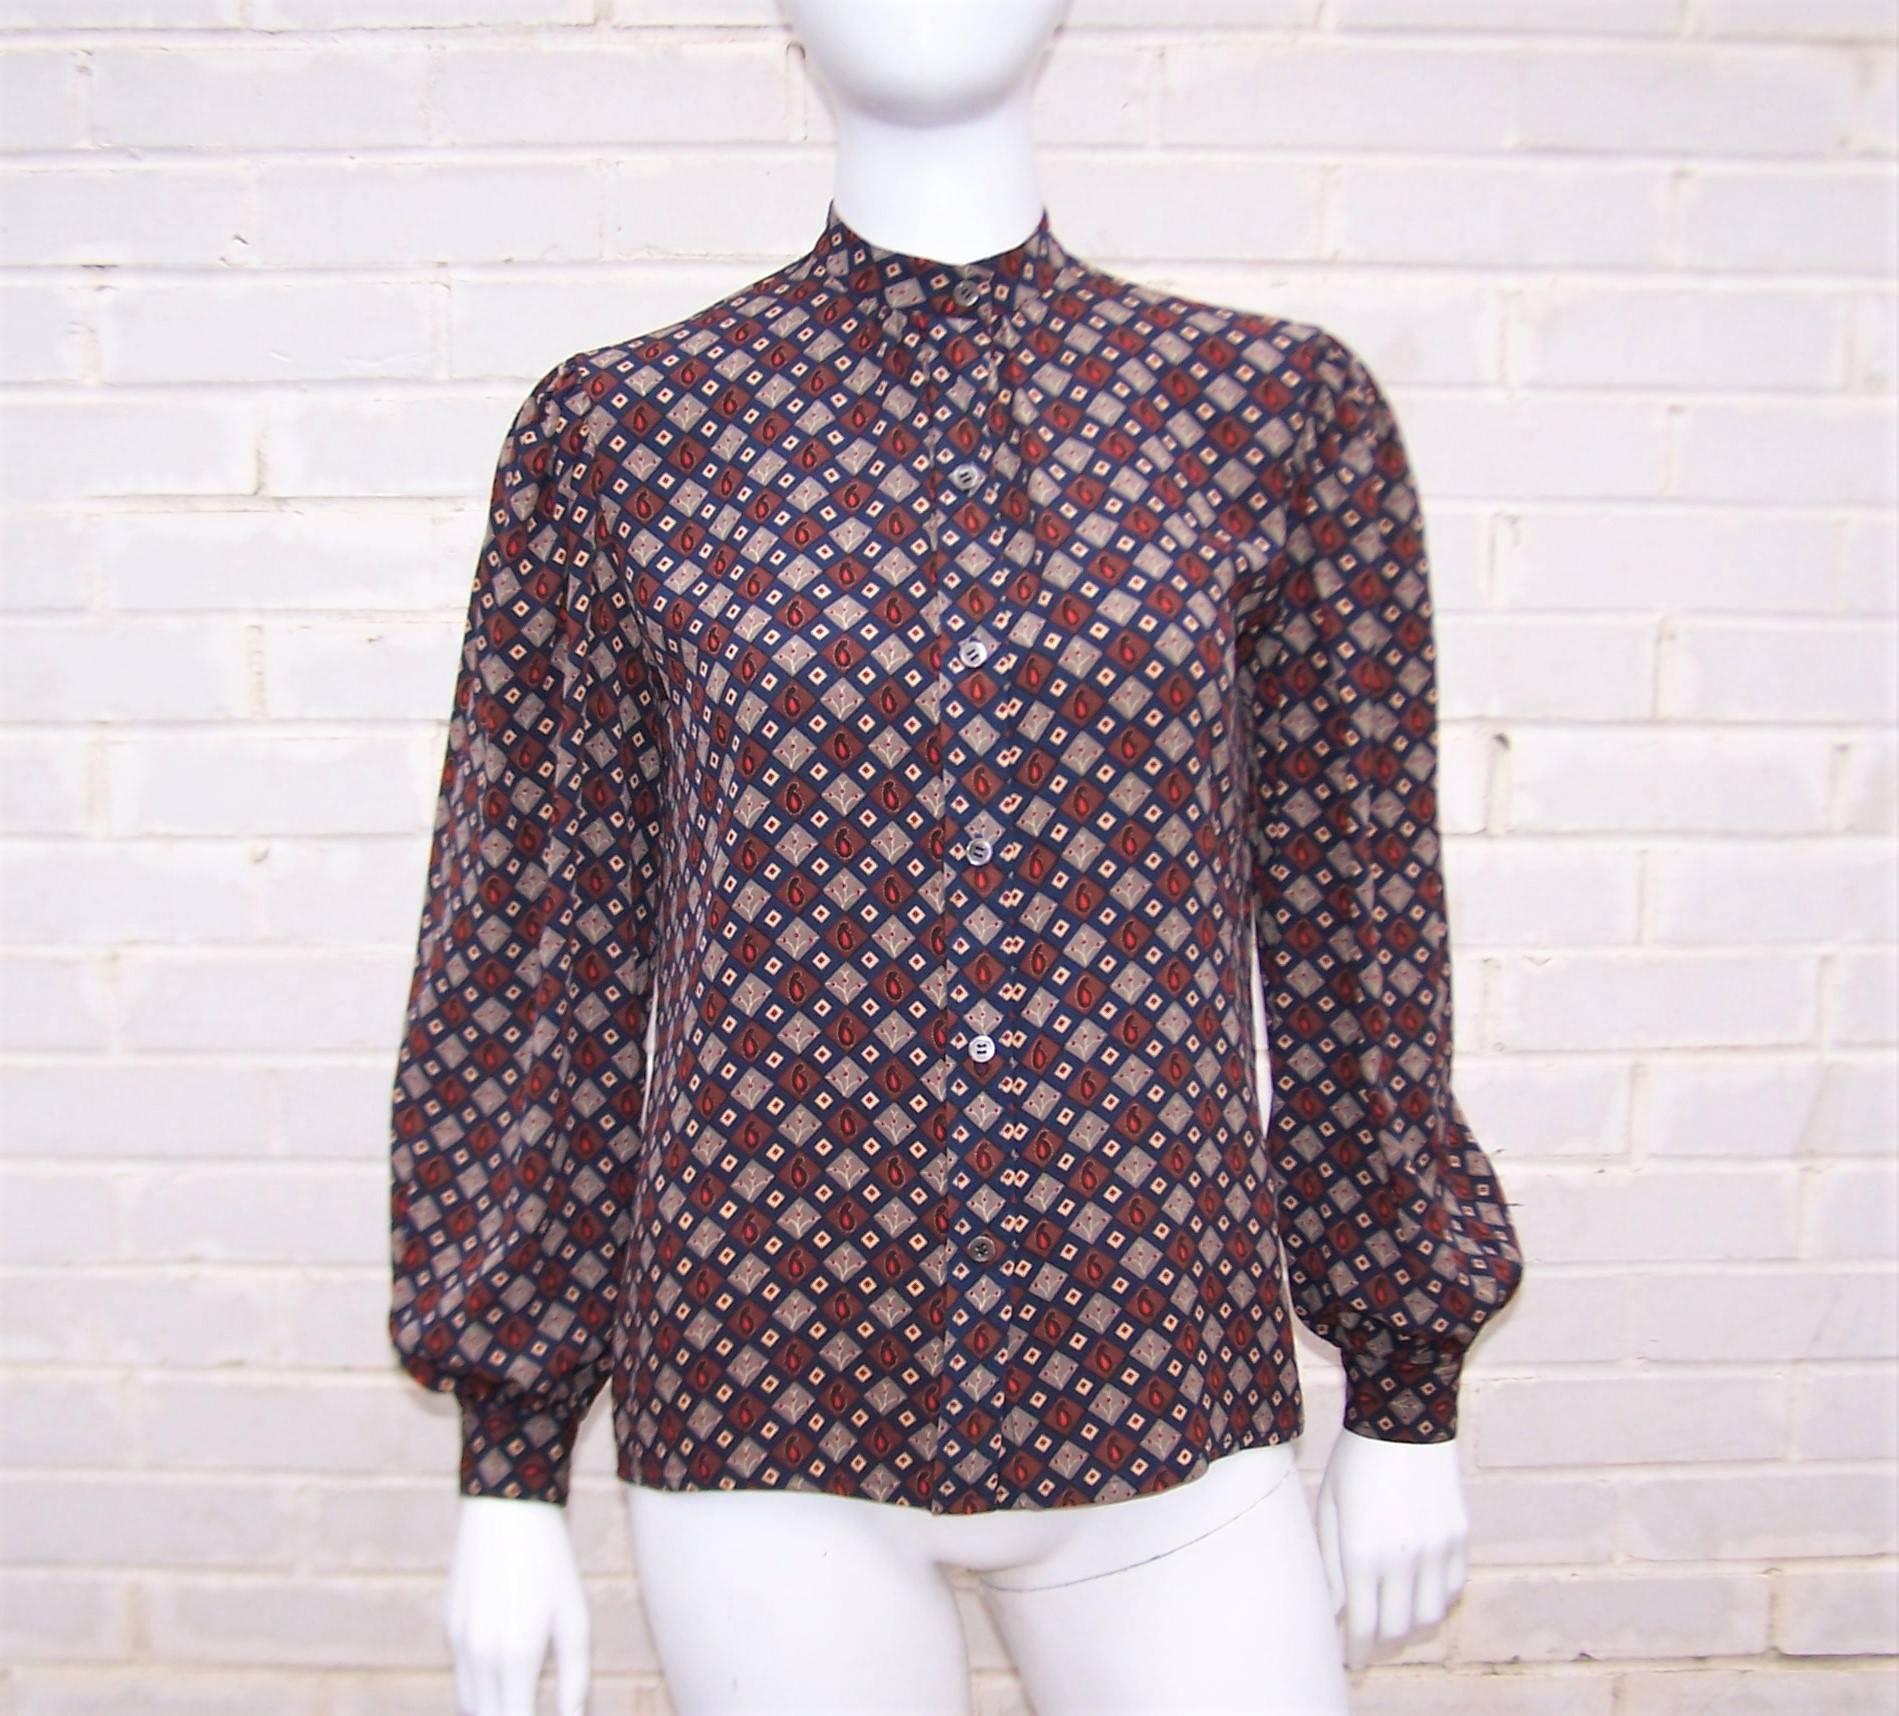 The lovely details on this Christian Dior silk blouse make it a perfect foil for everything from high waist trousers to jeans.  The soft gathering at the button front and back of the mandarin style collar along with the gathering at the top of the